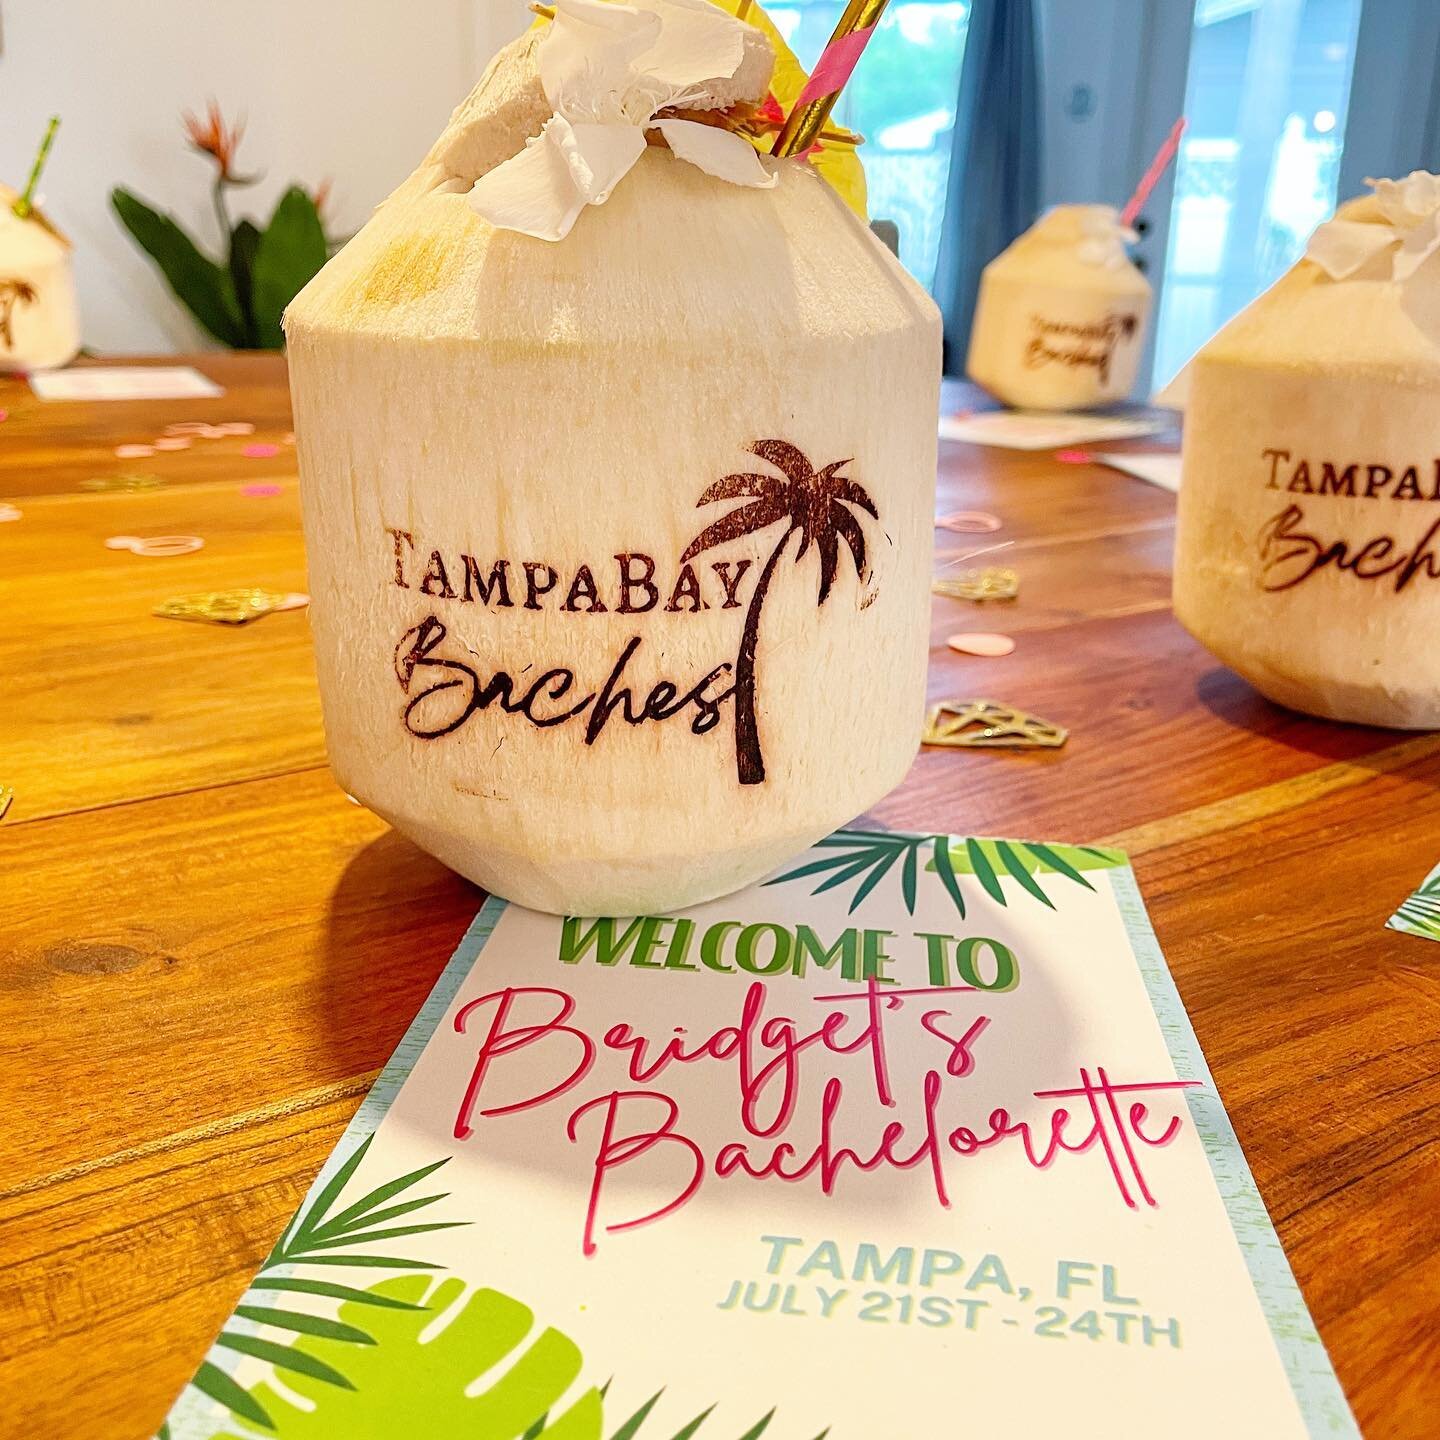 Seeing your parties reminds us that Tampa Bay is Paradise! We take it for granted but you snap us back to reality 💗 We LOVE that you have the time of your lives here 🥰👏 And love it even more that we can help plan it!
🏝Queen B Decor Package
📝Itin